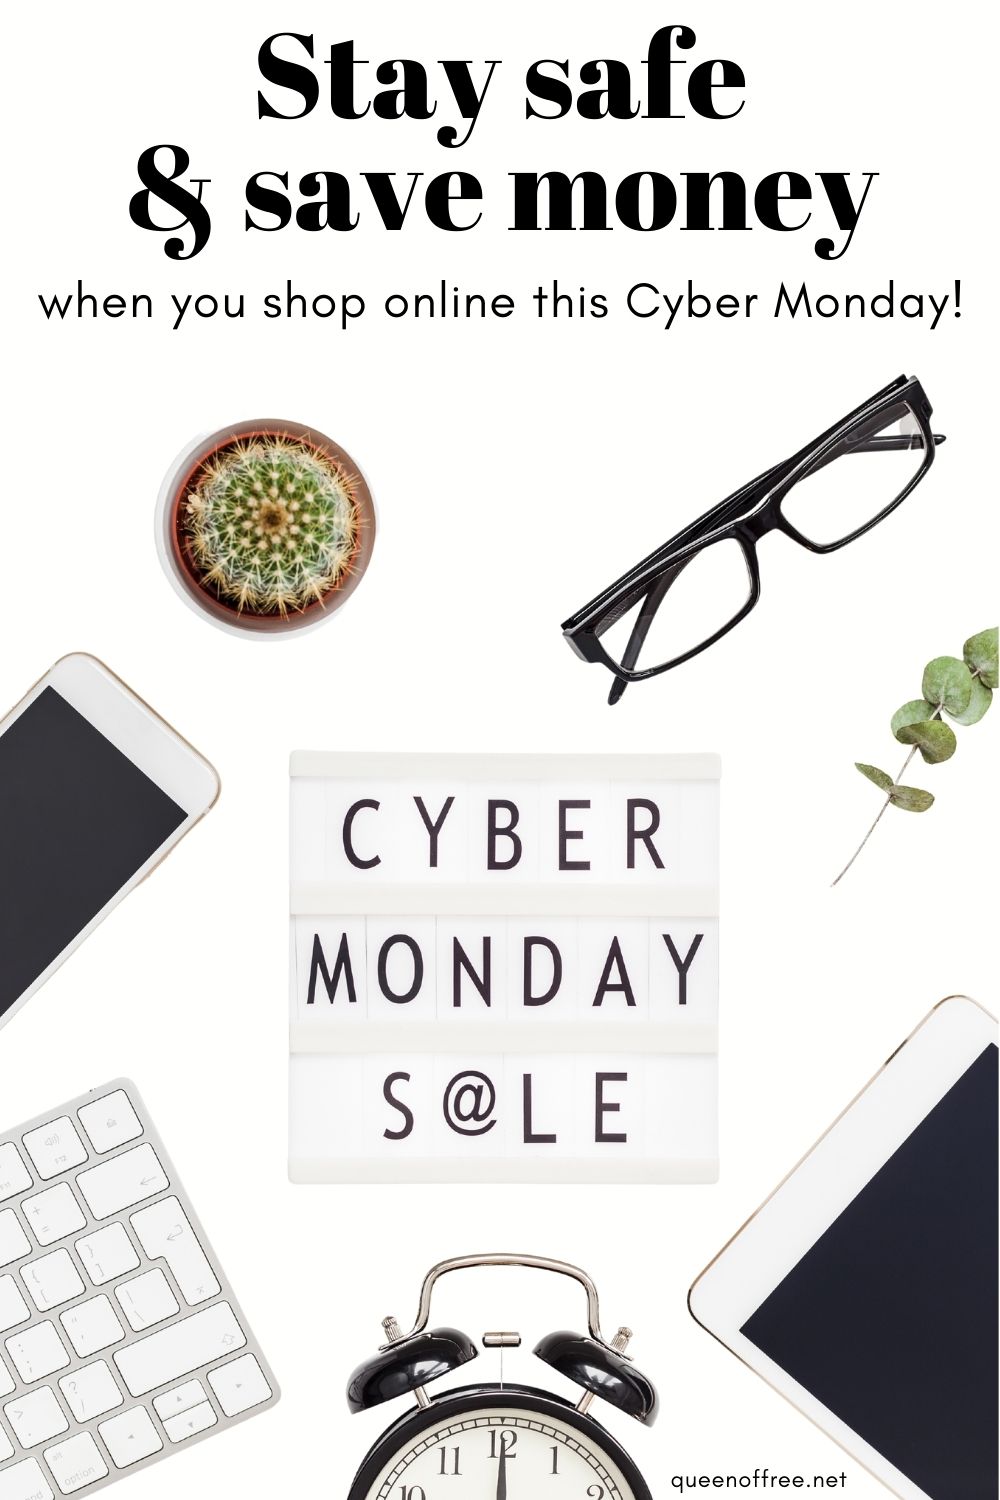 Take your Cyber Monday shopping to the next level. Use these smart strategies to avoid scams and save more money than you thought possible.